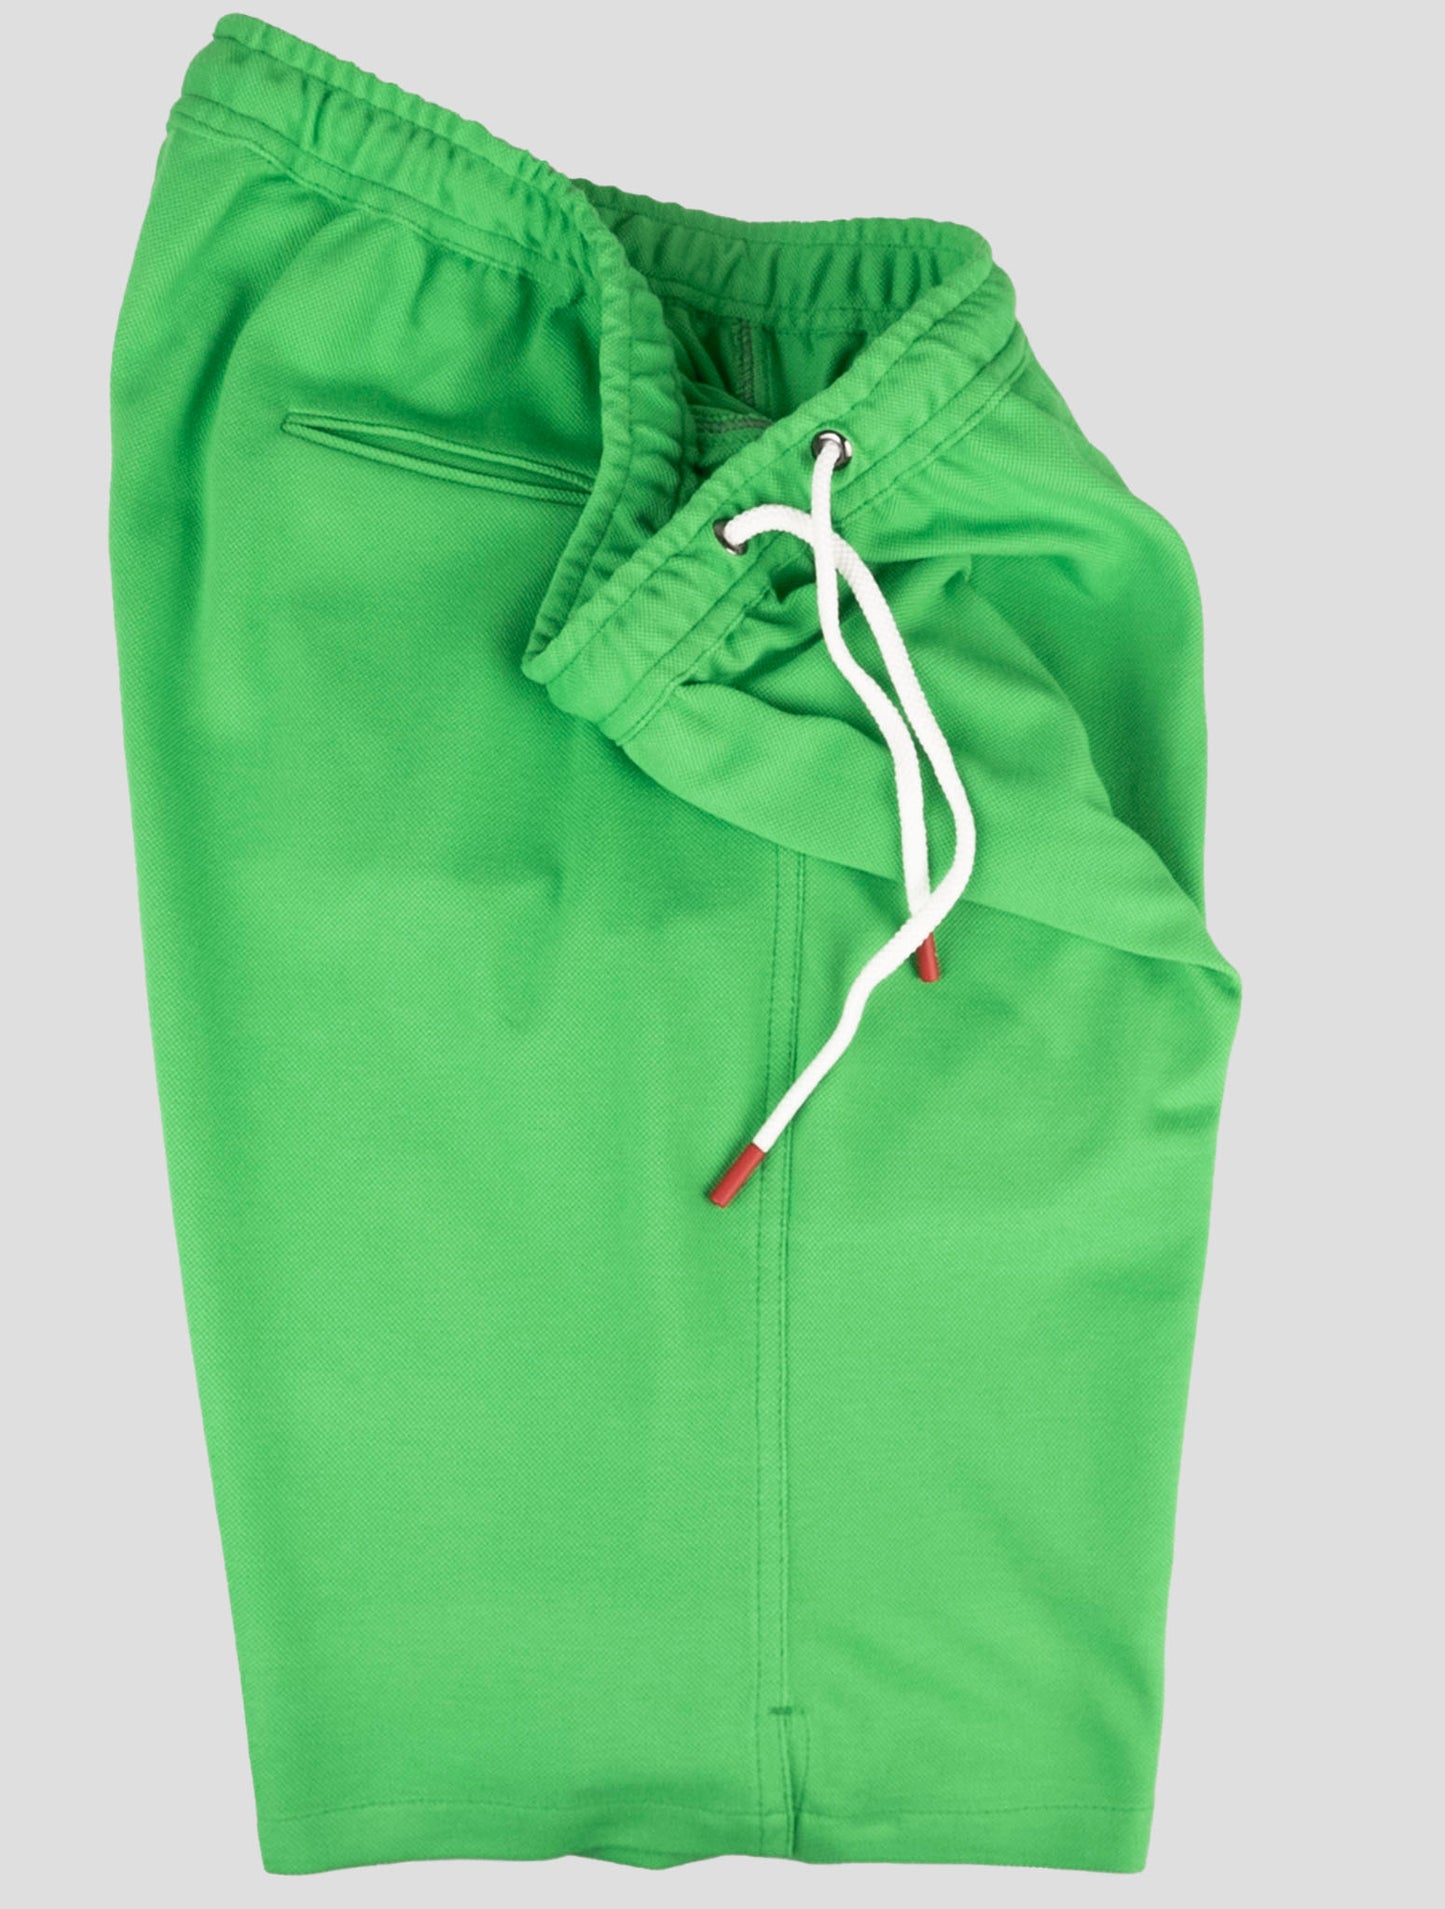 Kiton Matching Outfit - Blue Mariano and  Green Short Pants Tracksuit